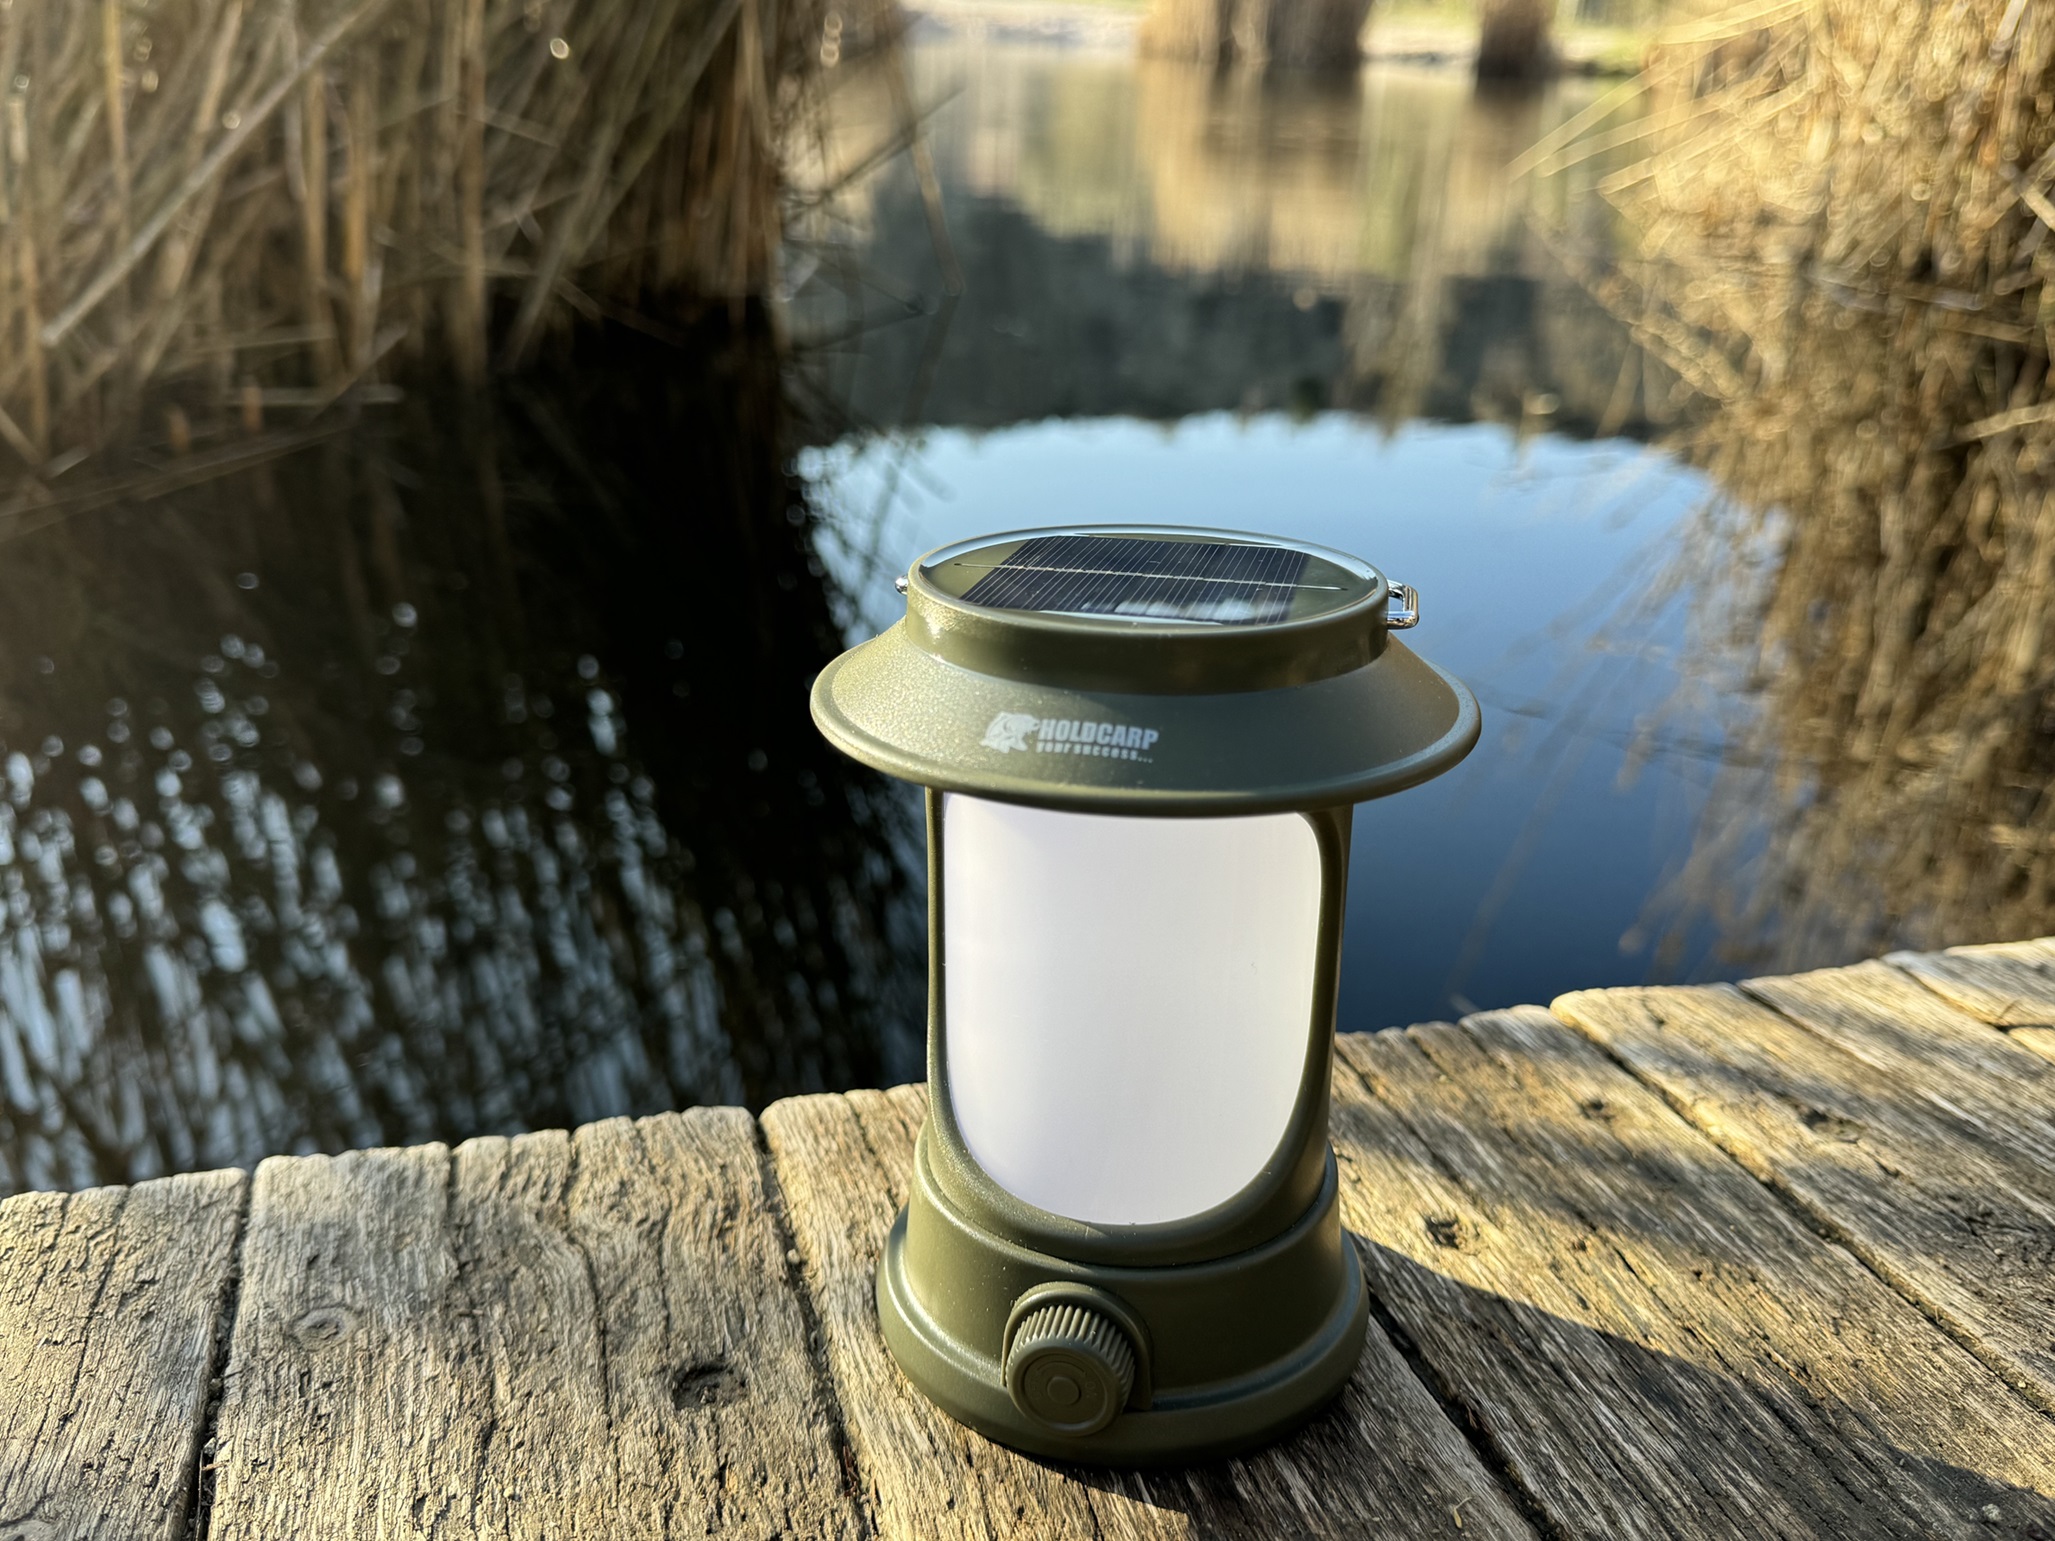 Holdcarp Solar Lamp (Rechargeable with Solar Energy)